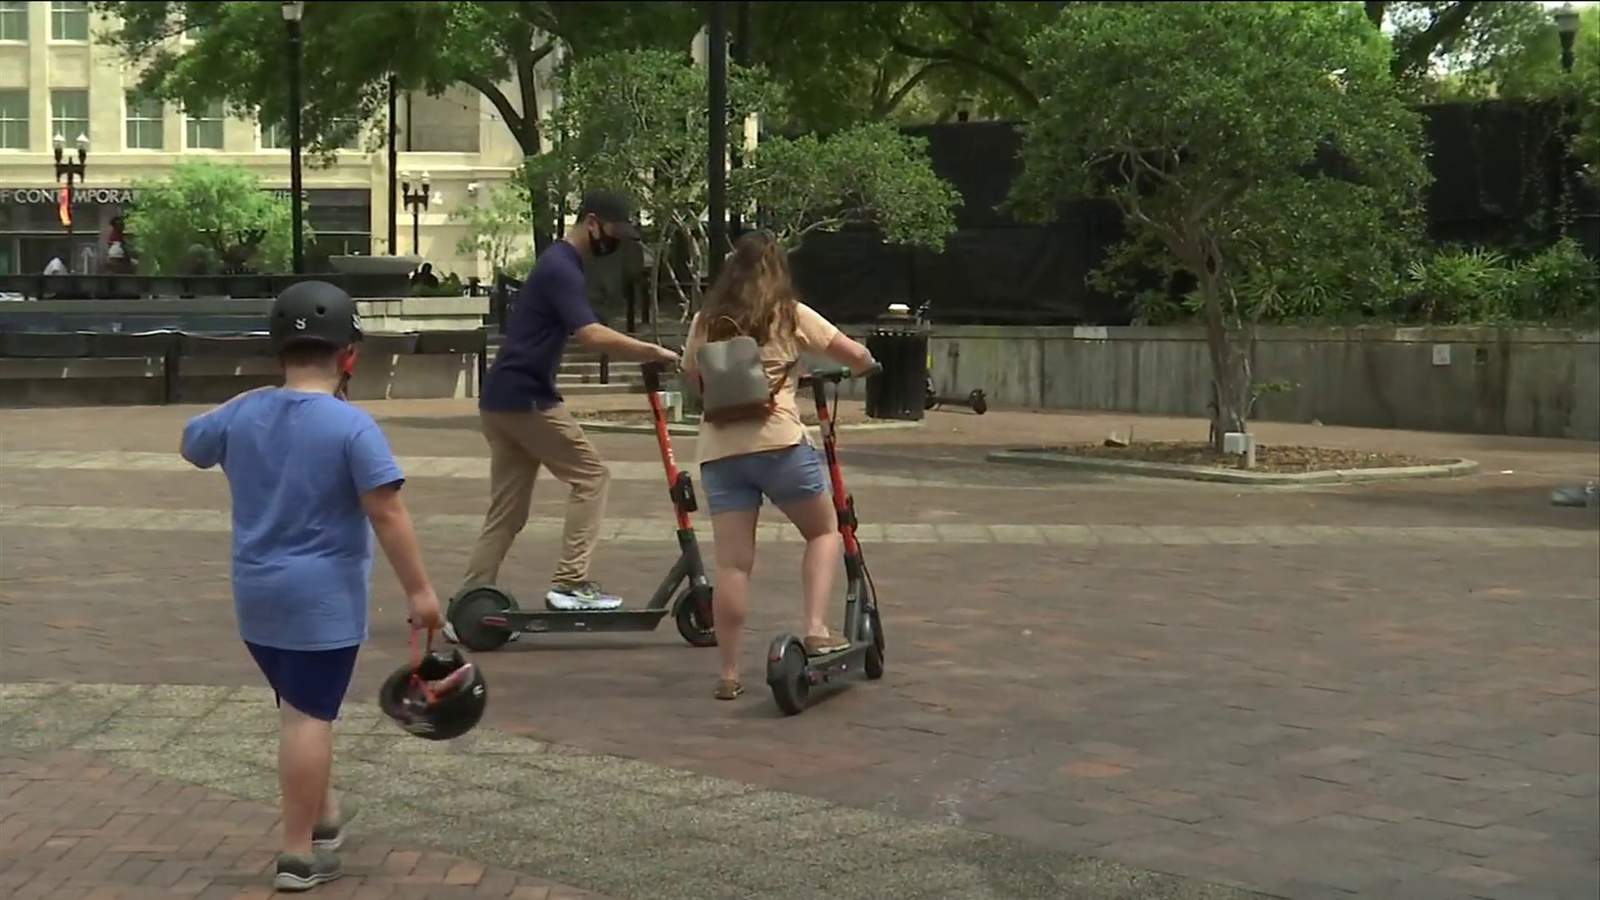 More scooters in Jacksonville? City council may expand limit on electric scooter vendors